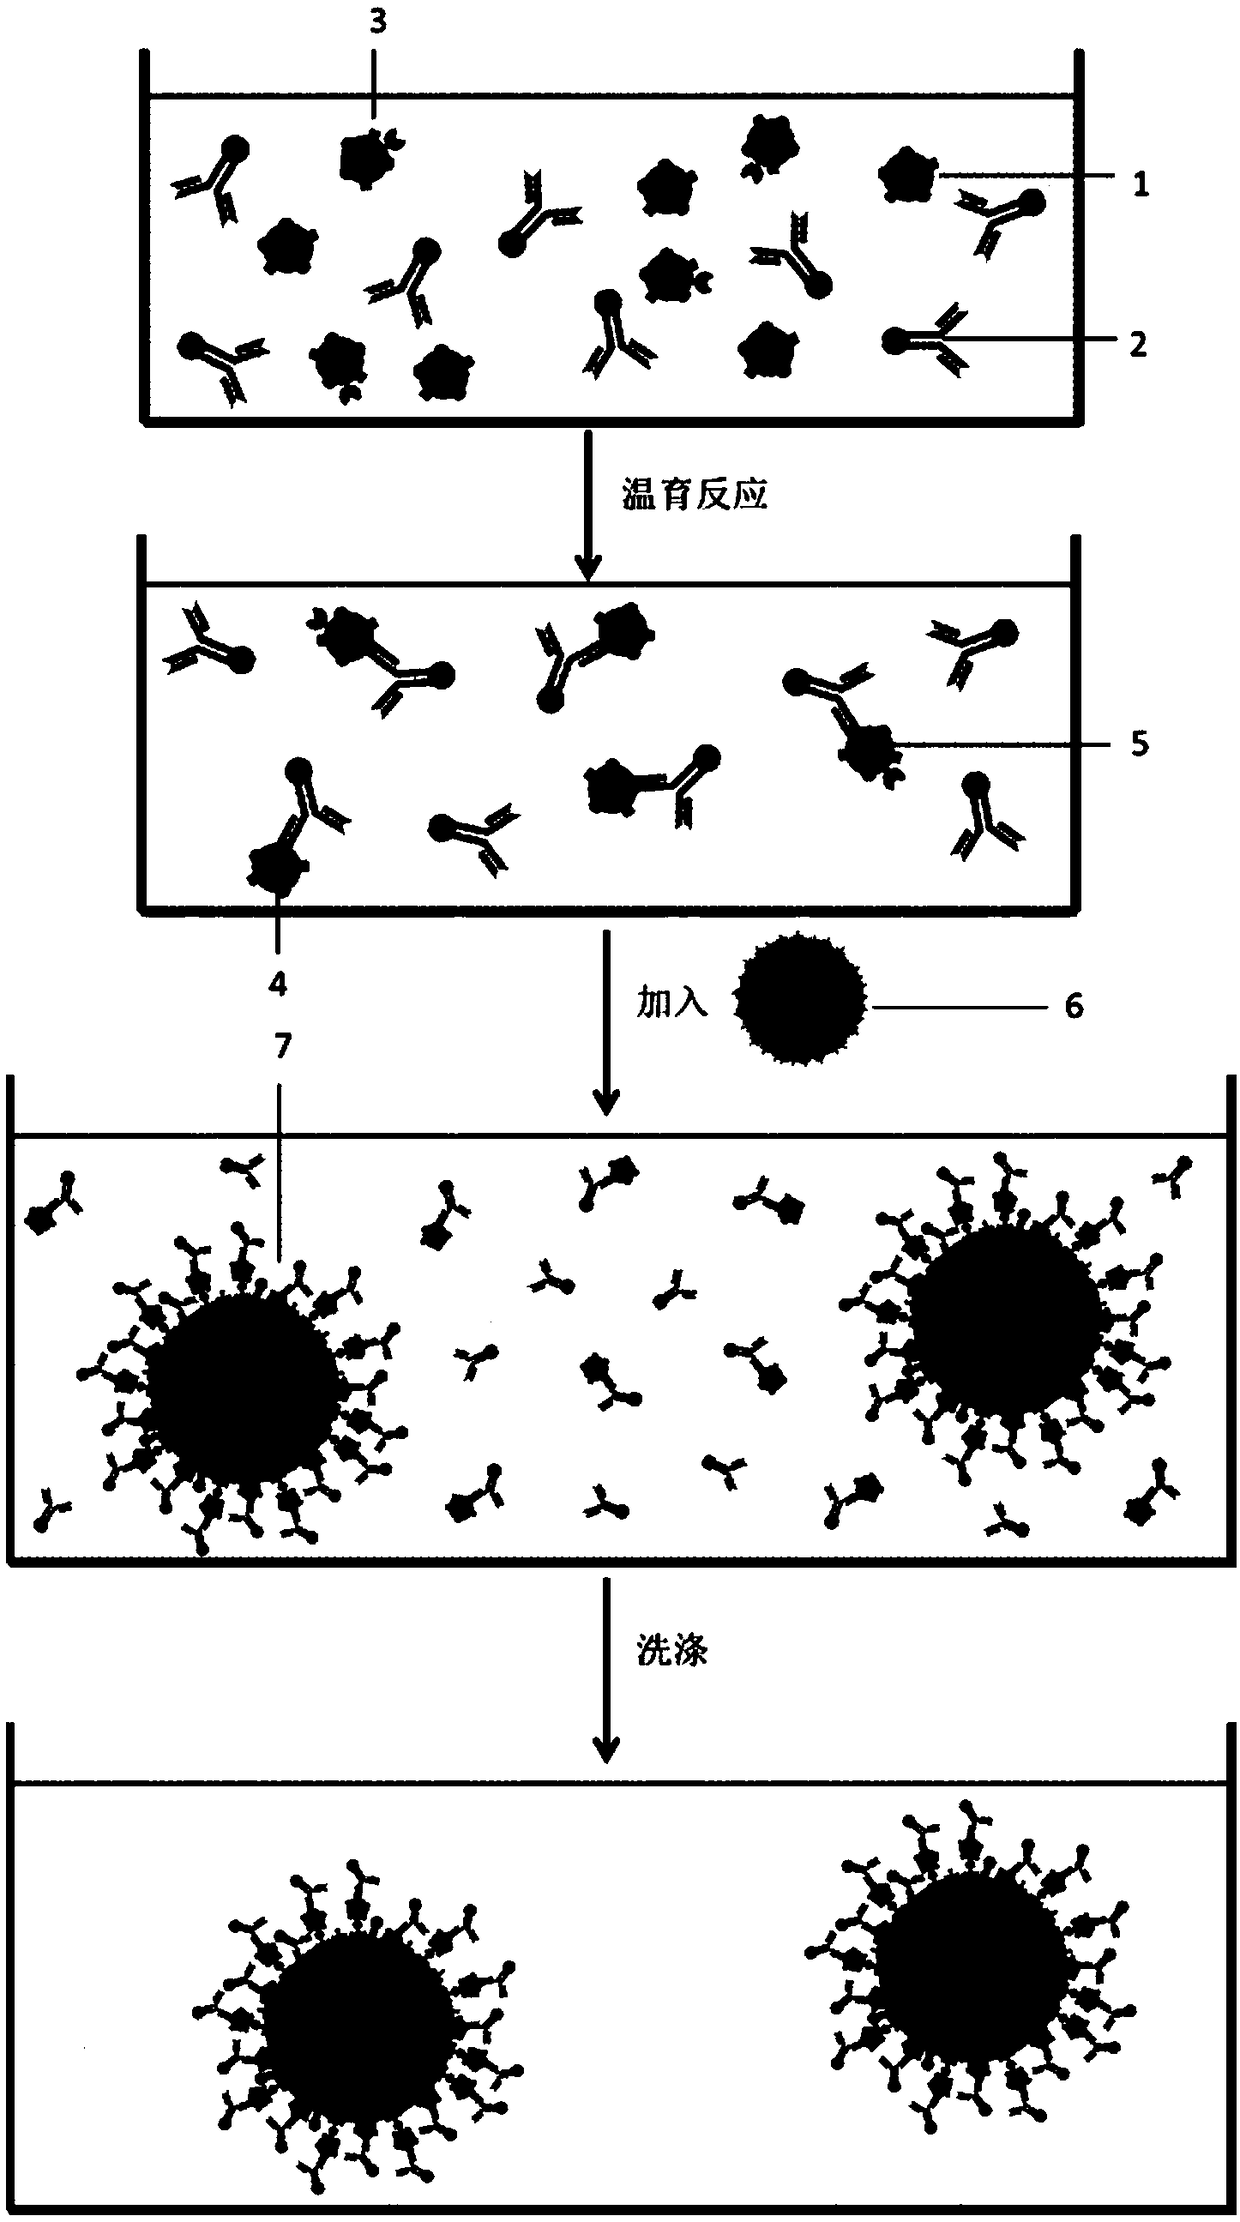 Single-pulse detection method for immune reaction with metal ion labeling